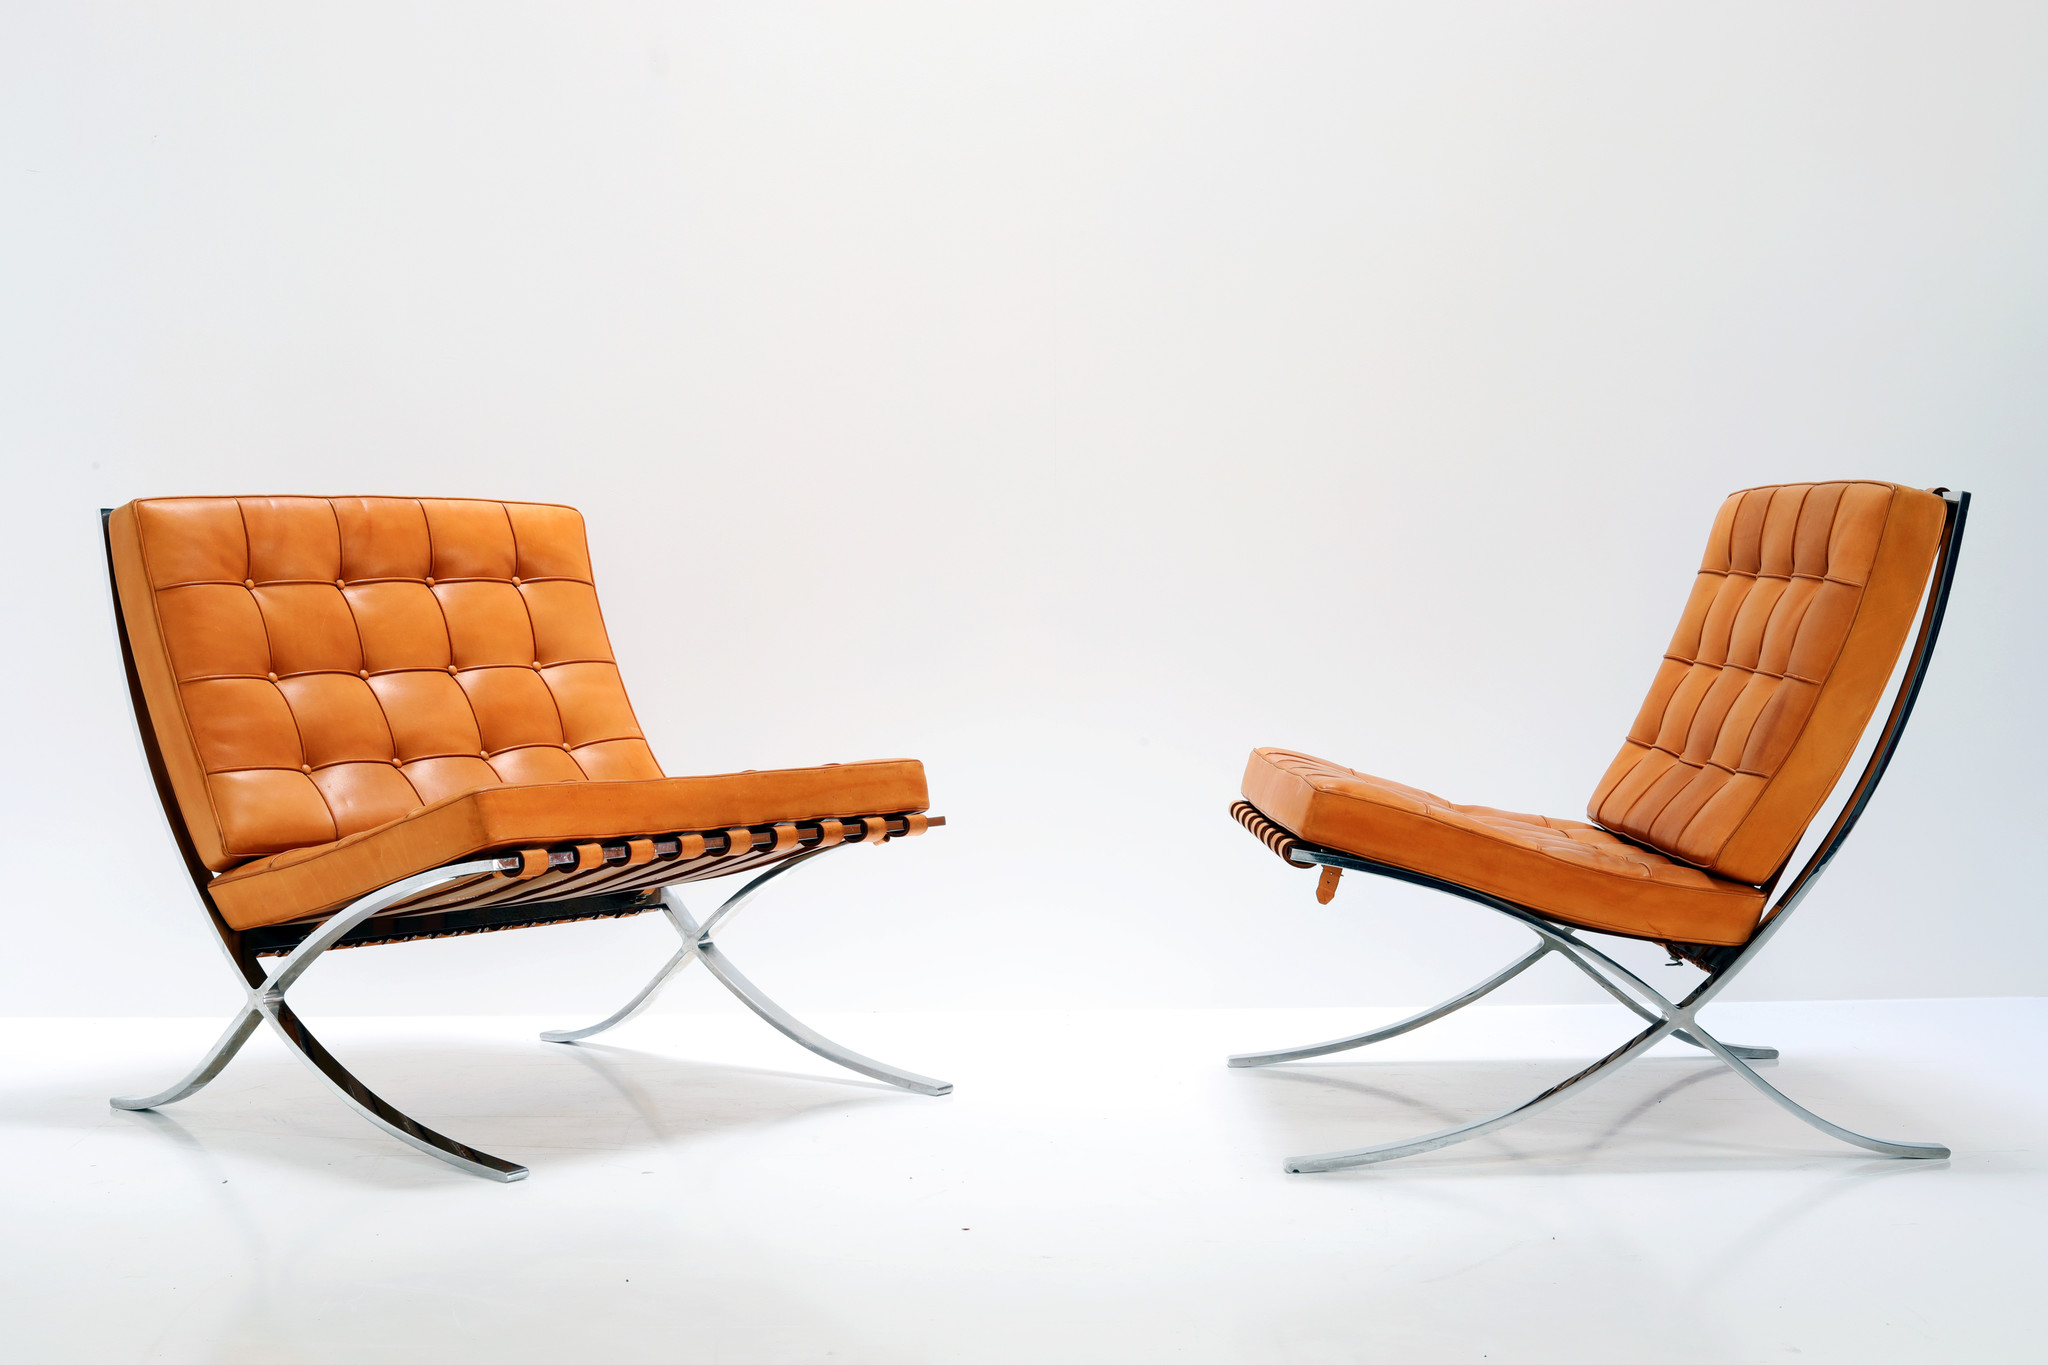 PAIR OF VINTAGE BARCELONA CHAIRS BY LUDWIG MIES VAN DER ROHE